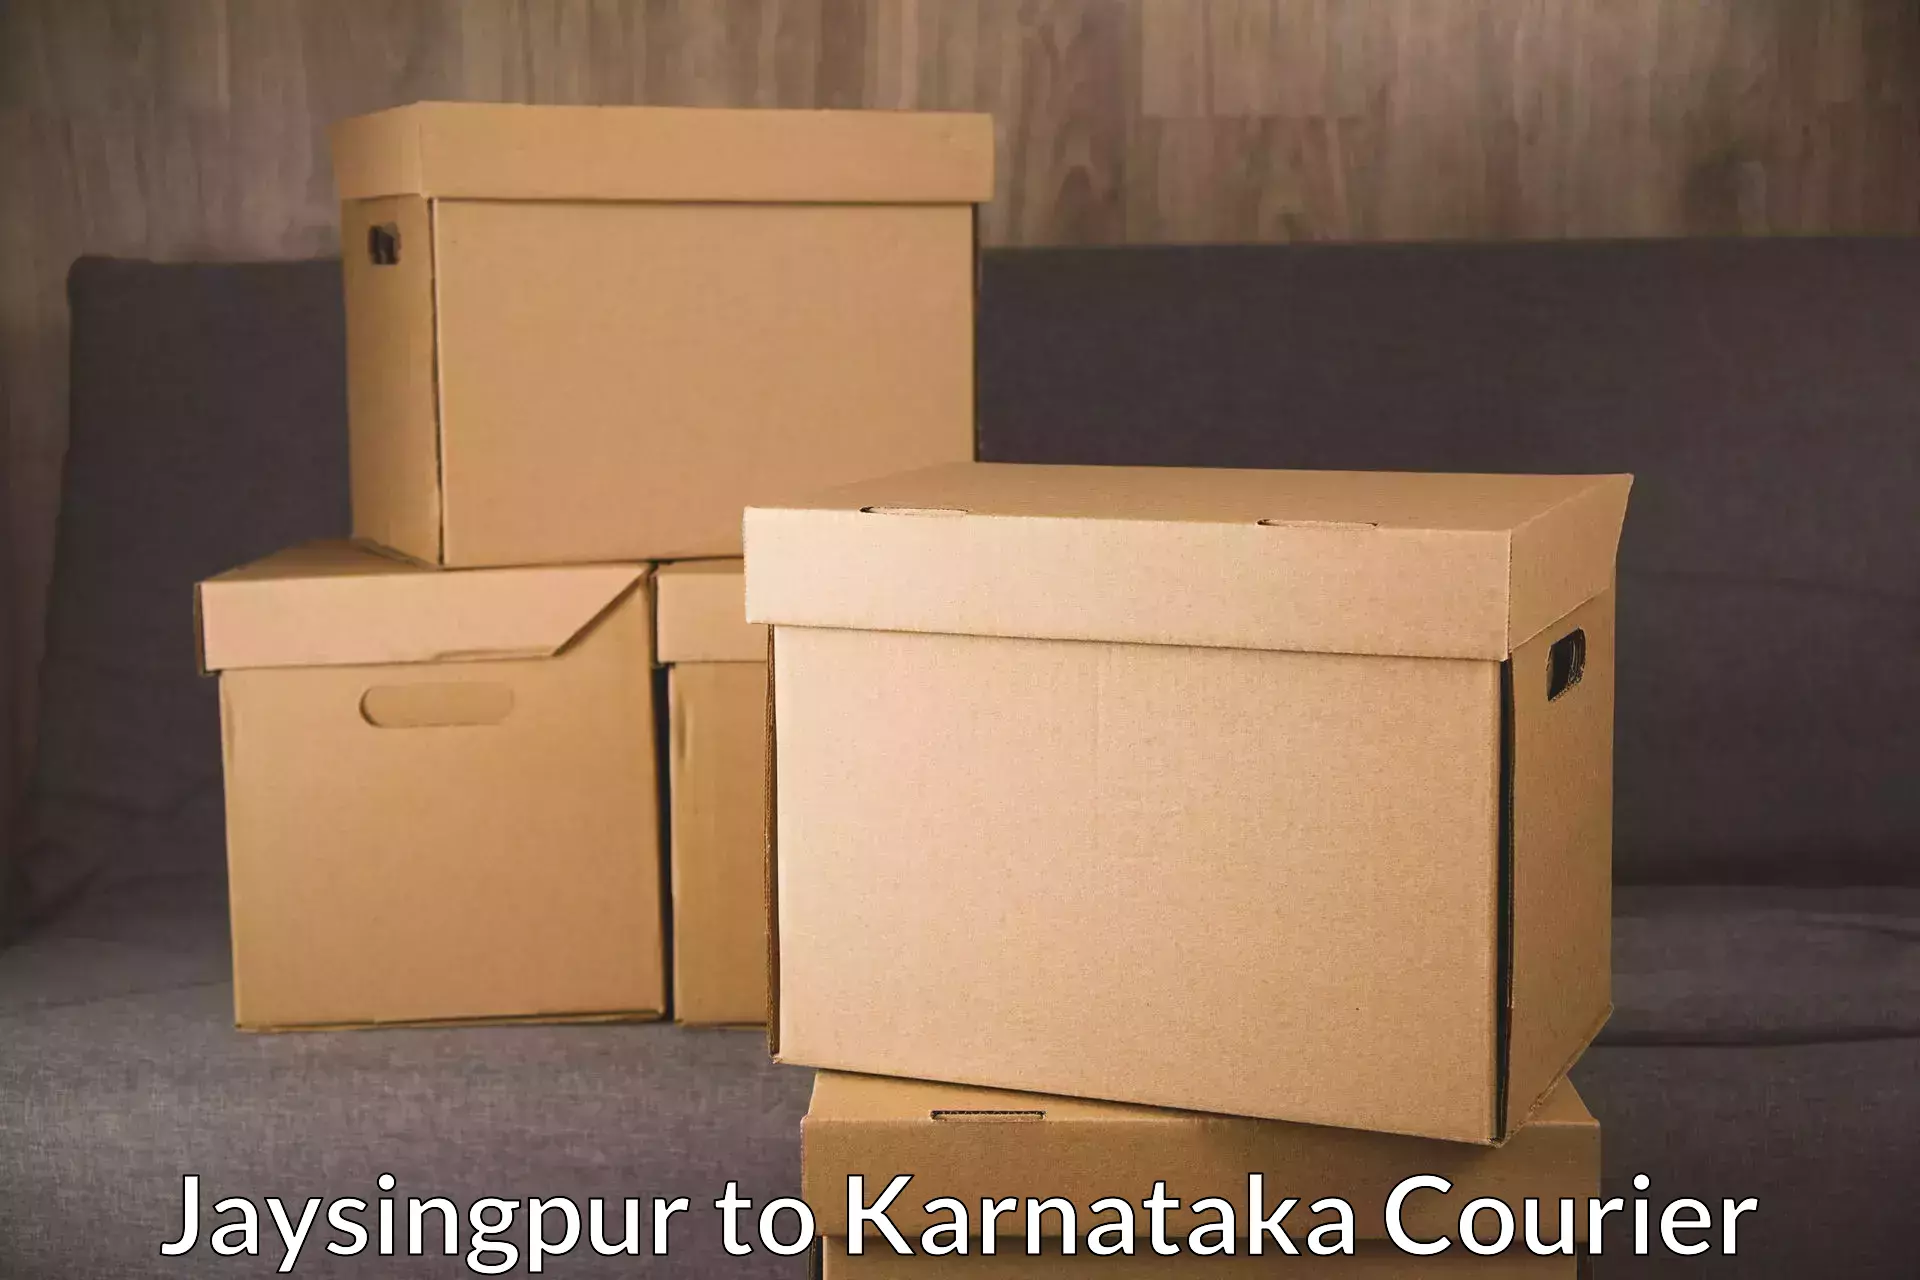 24-hour courier services in Jaysingpur to Chintamani Kolar